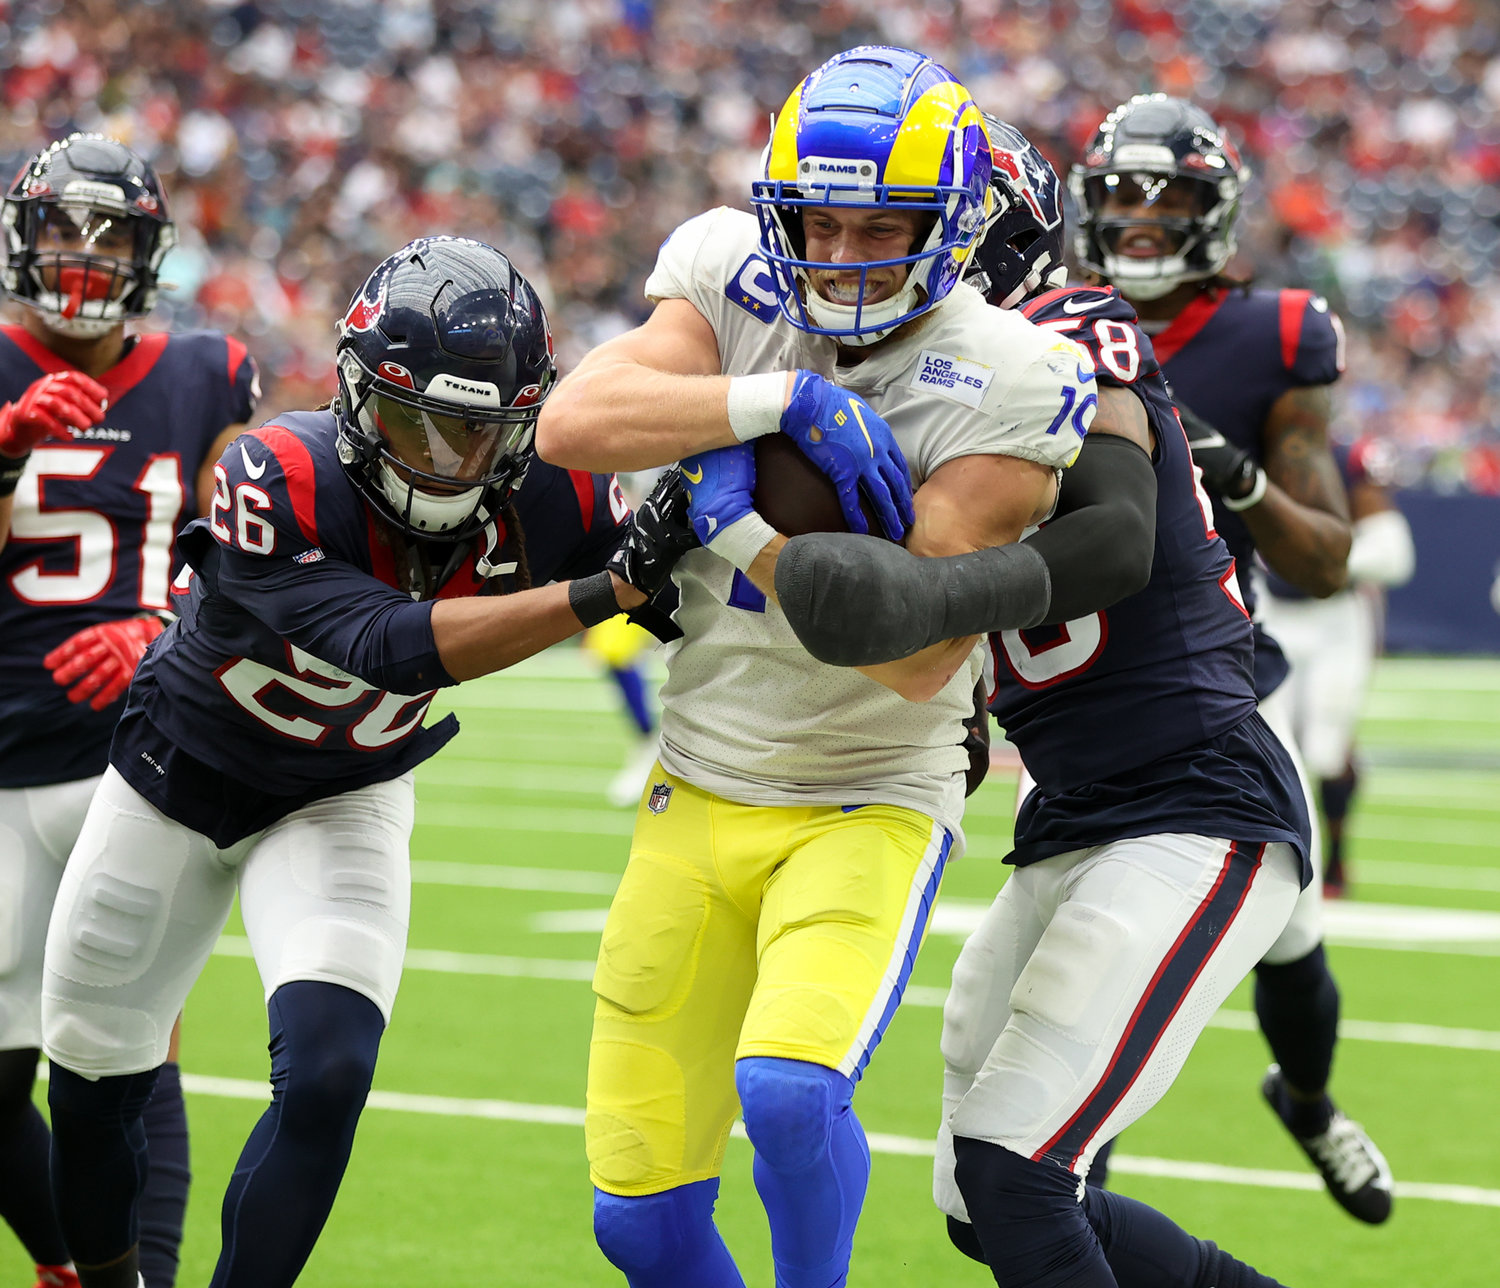 Los Angeles Rams wide receiver Cooper Kupp (10) is run out of bounds after a catch during an NFL game between Houston and the Los Angeles Rams on October 31, 2021 in Houston, Texas.